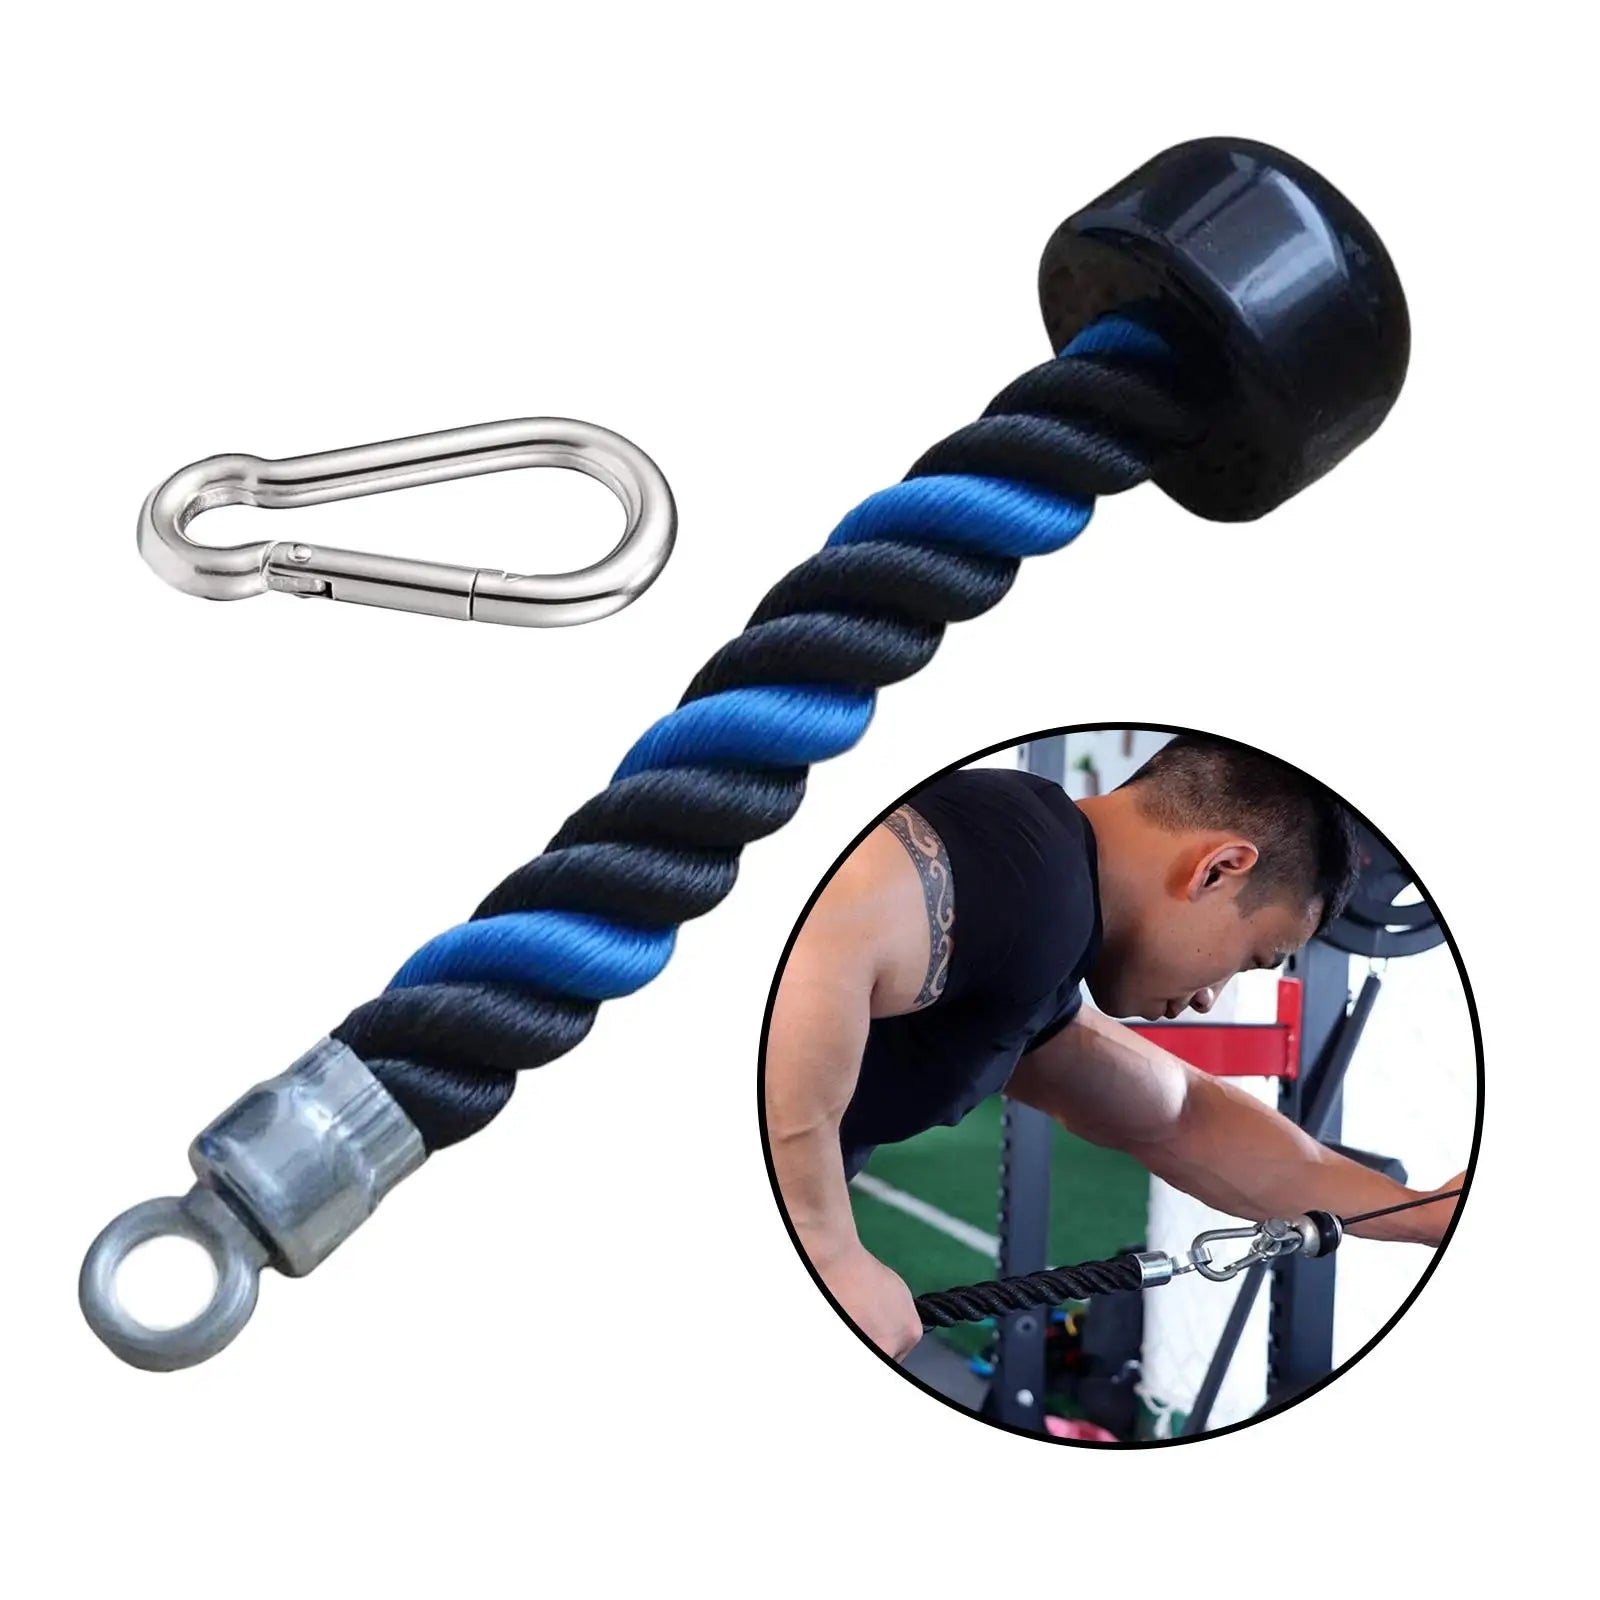 Single Handle Pulley Cable Tie for Triceps Rope Pull Down Attachment